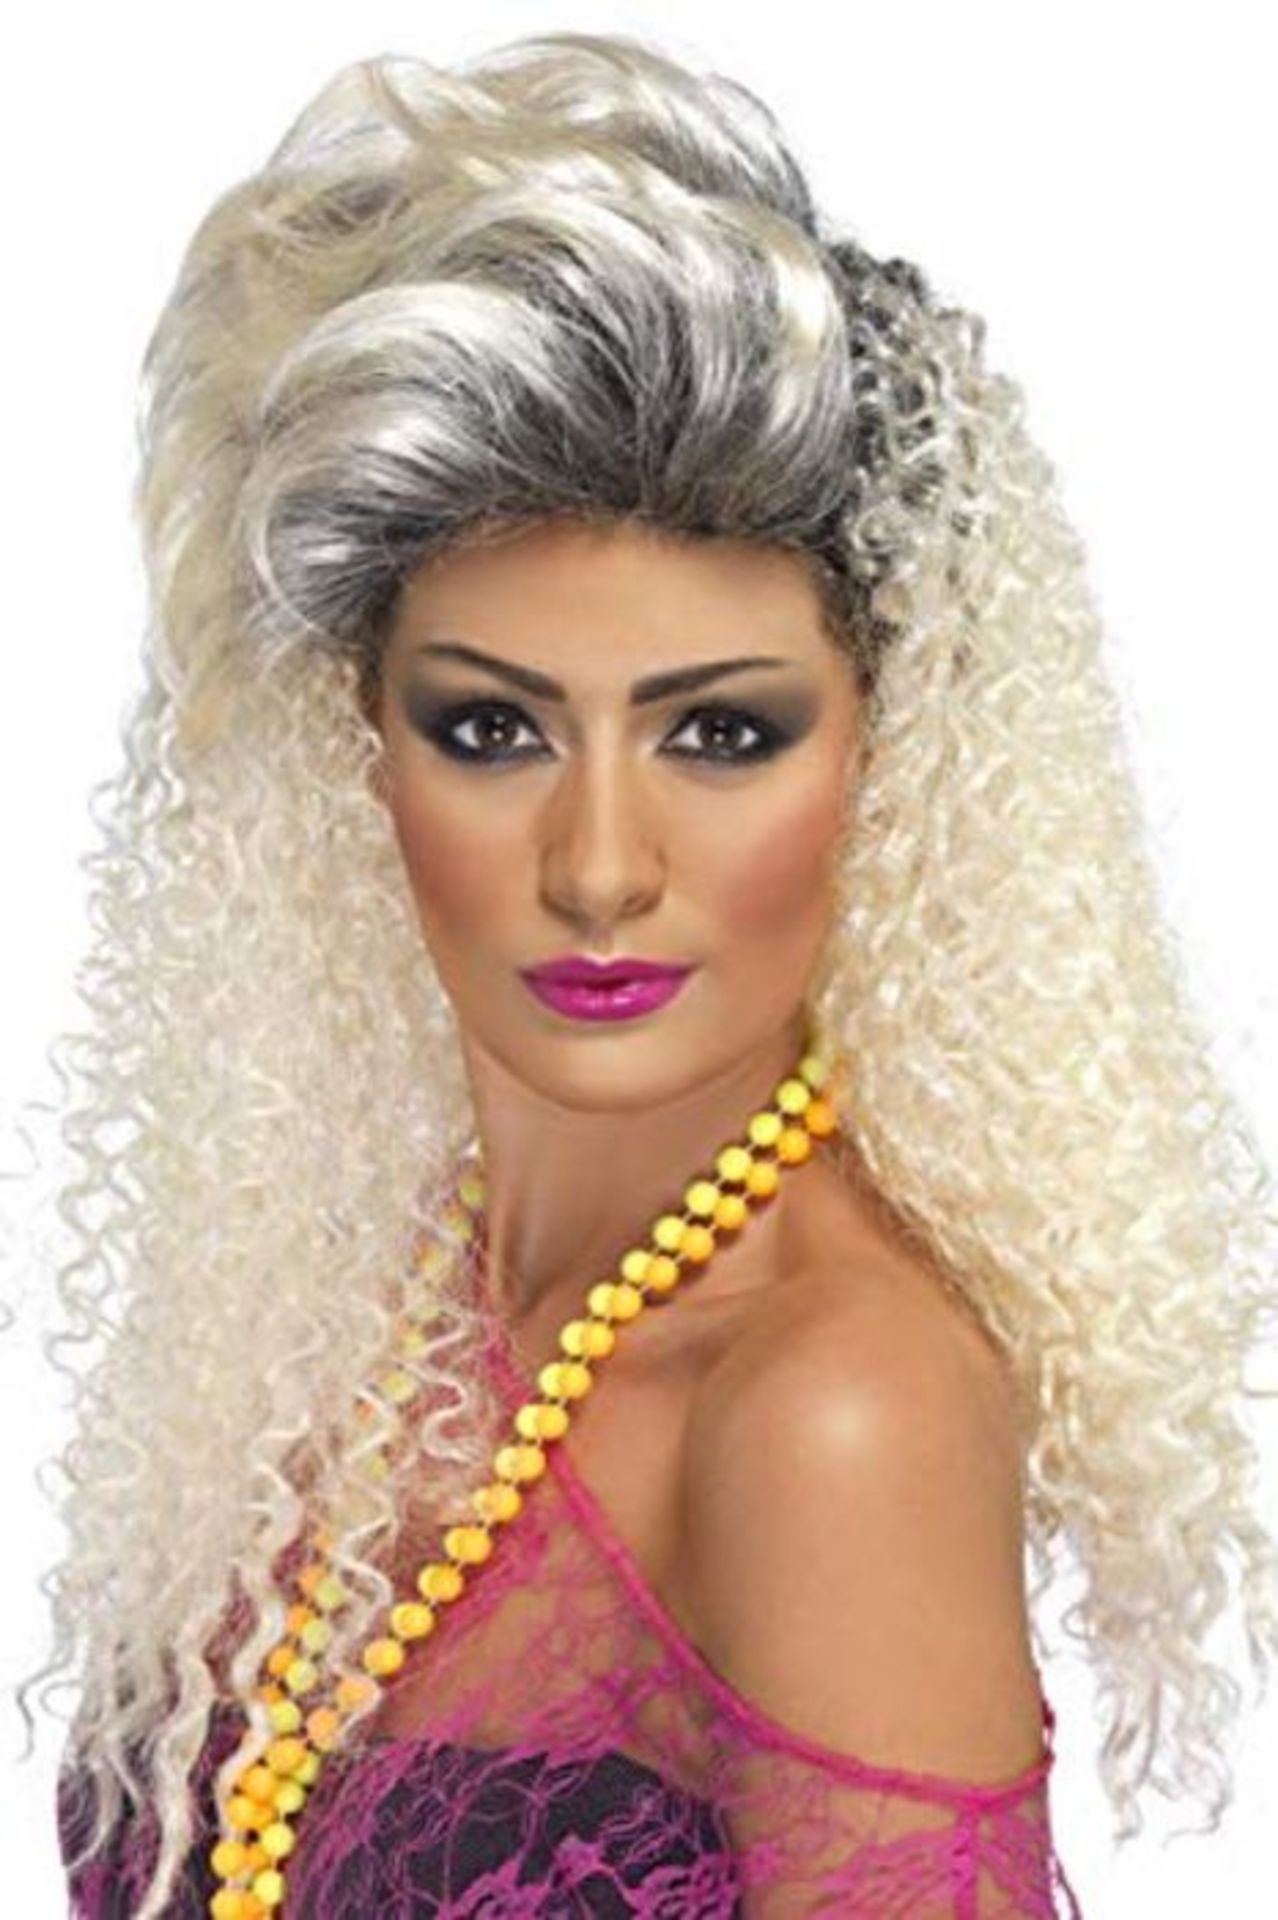 Smiffys Women's Long Curly Blonde 80's Wig with Quiff, One Size, 80's Bottle Wig, 5020